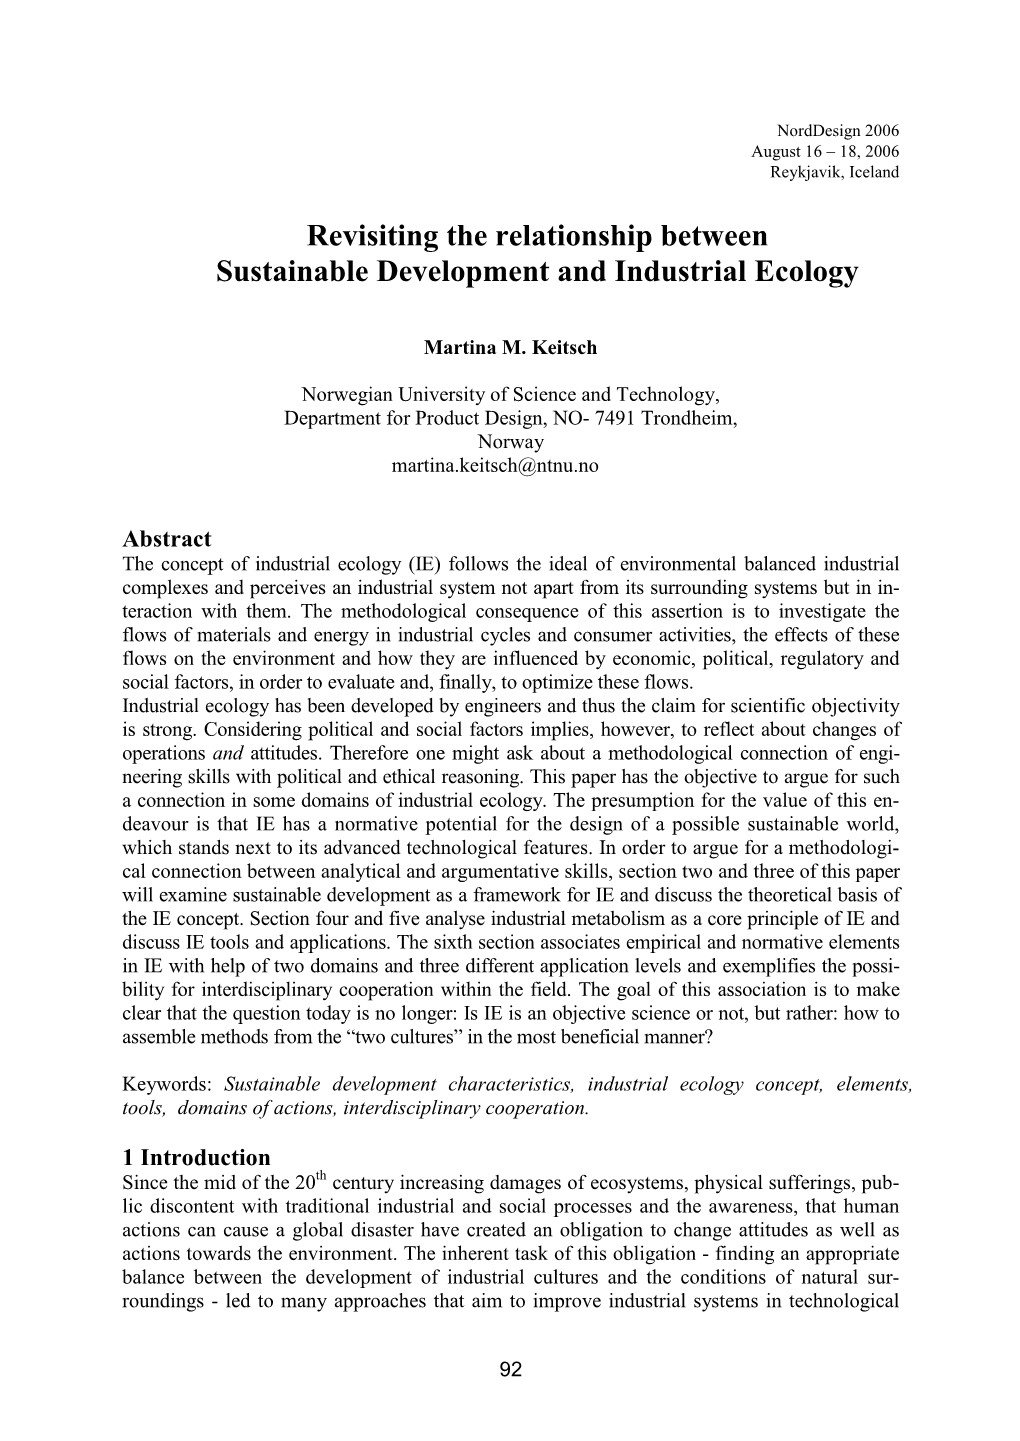 Revisiting the Relationship Between Sustainable Development and Industrial Ecology